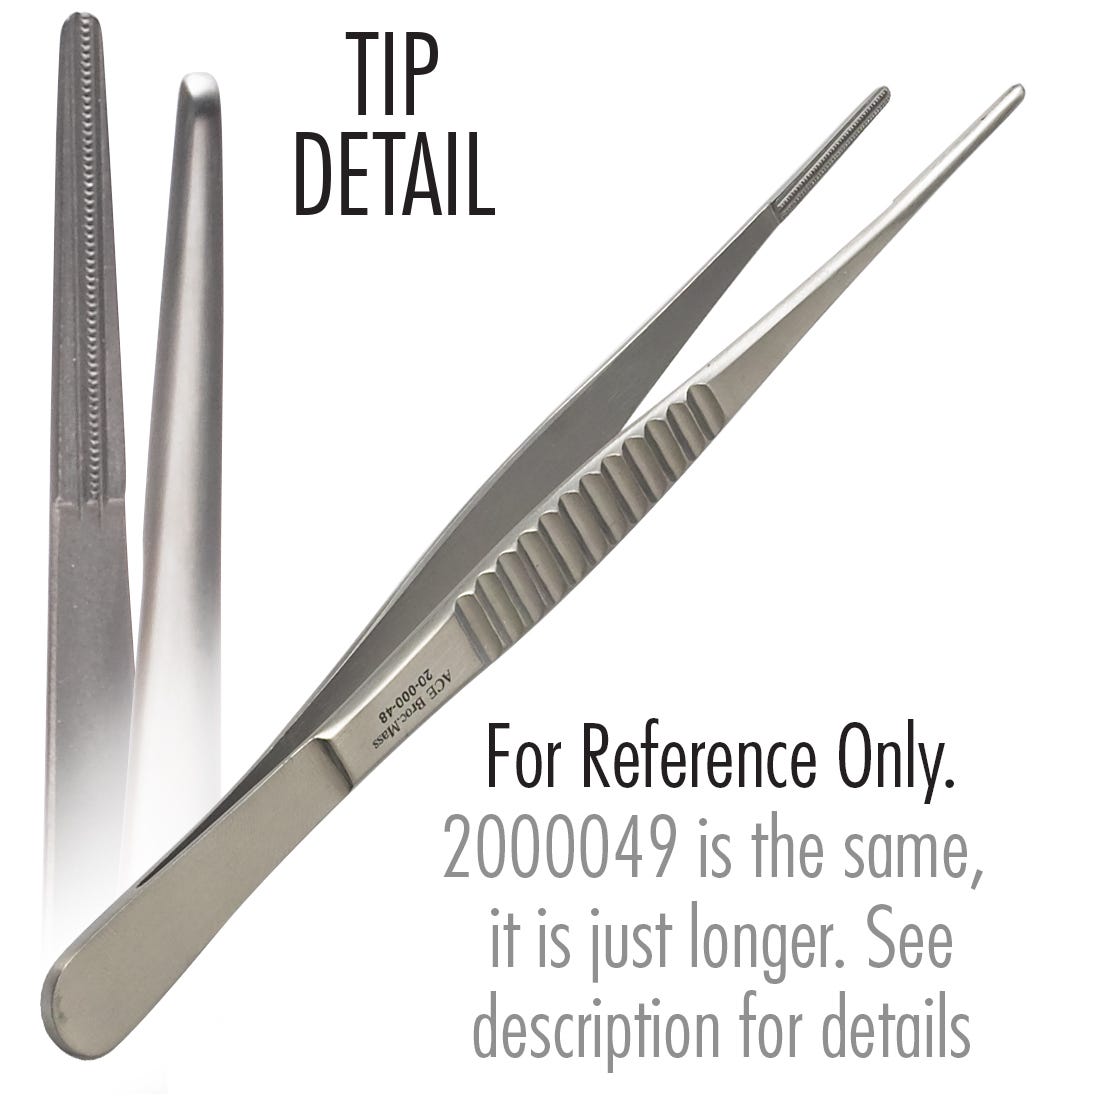 ACE DeBakey Tissue Forceps, 2mm wide tips, large